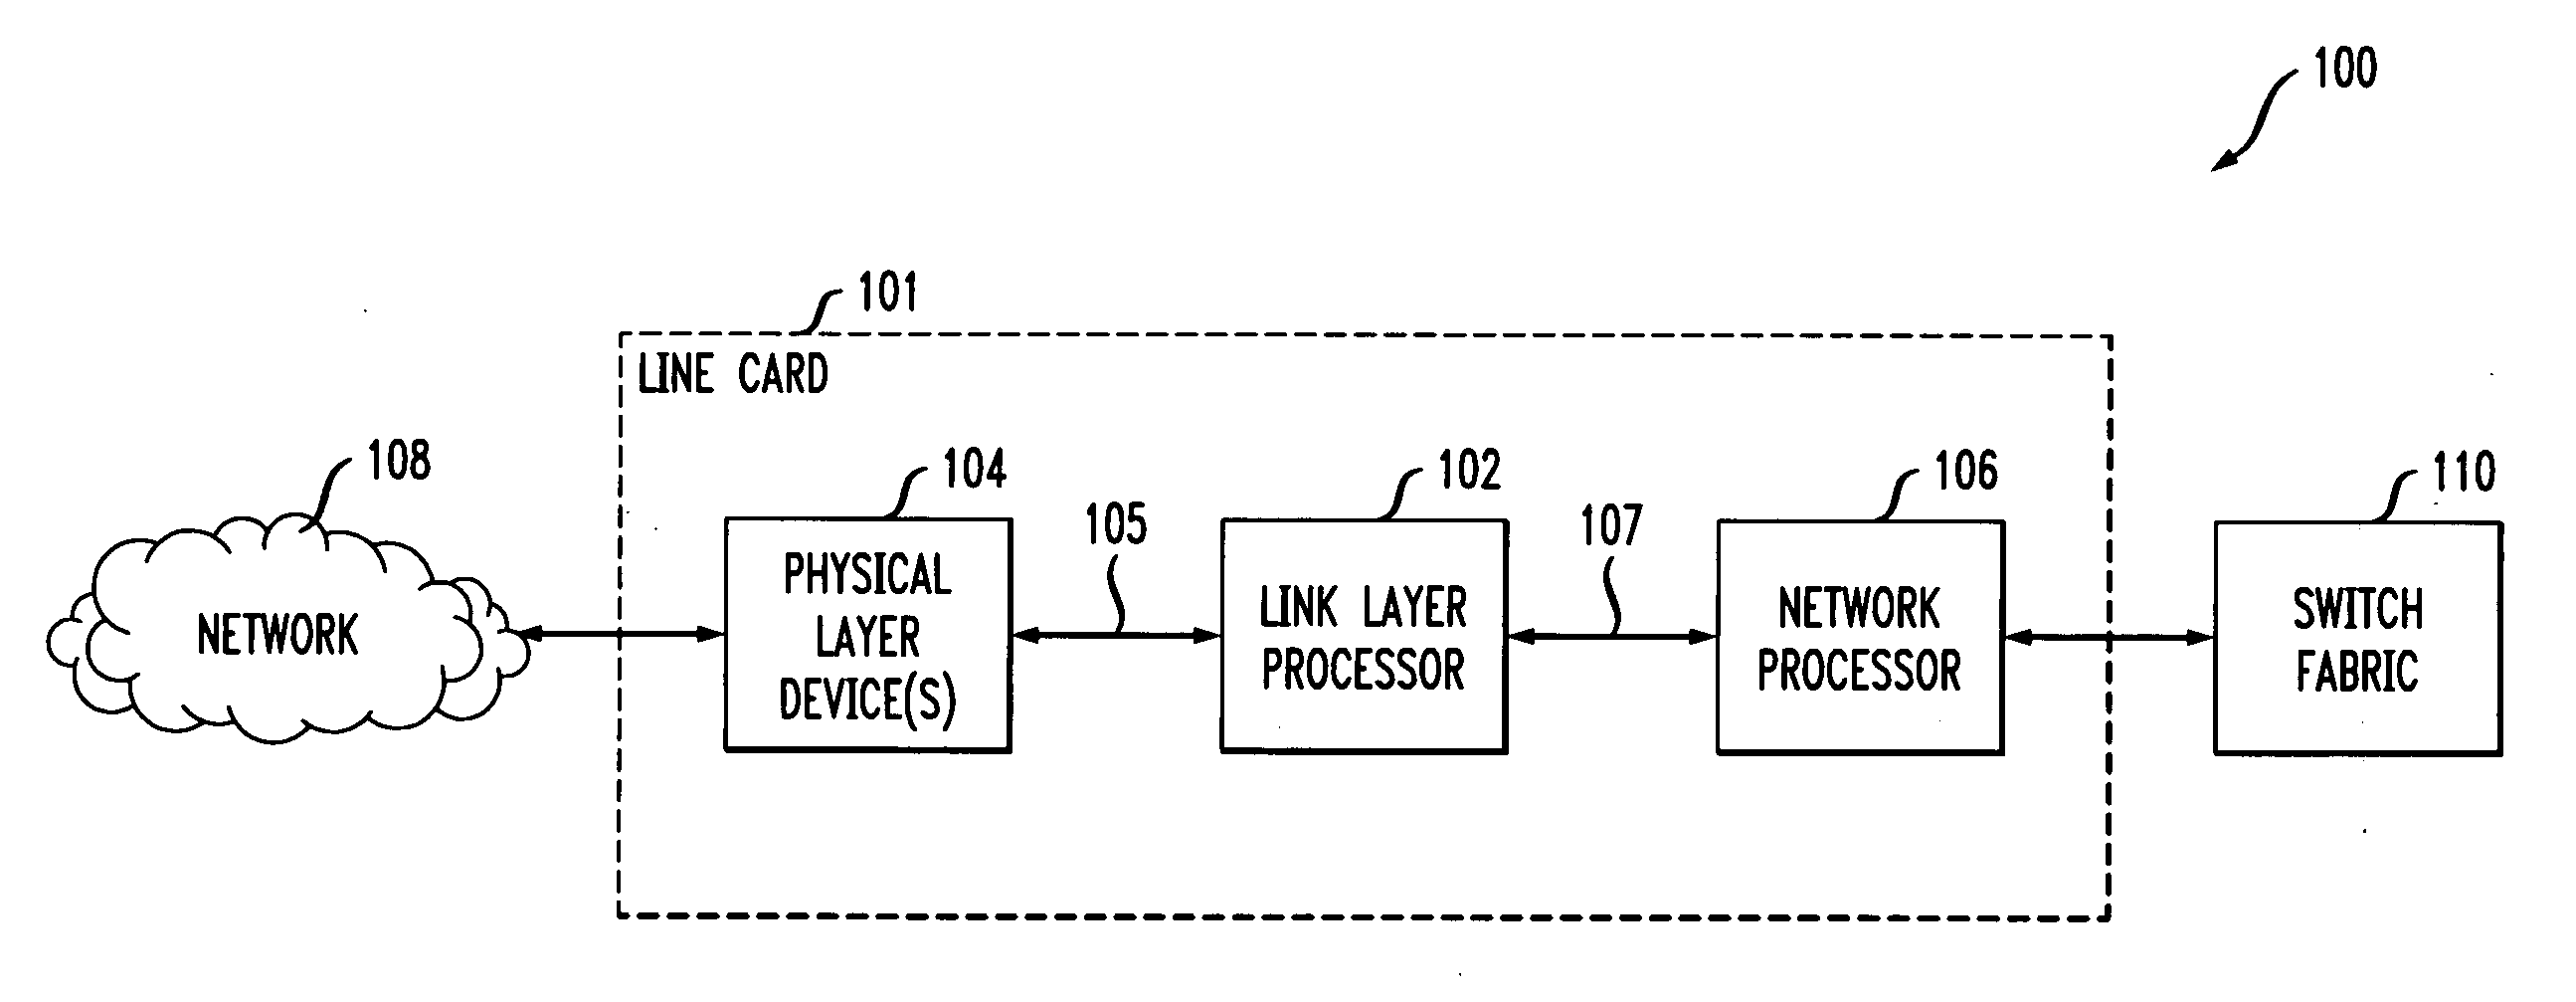 Link layer device with clock processing hardware resources shared among multiple ingress and egress links